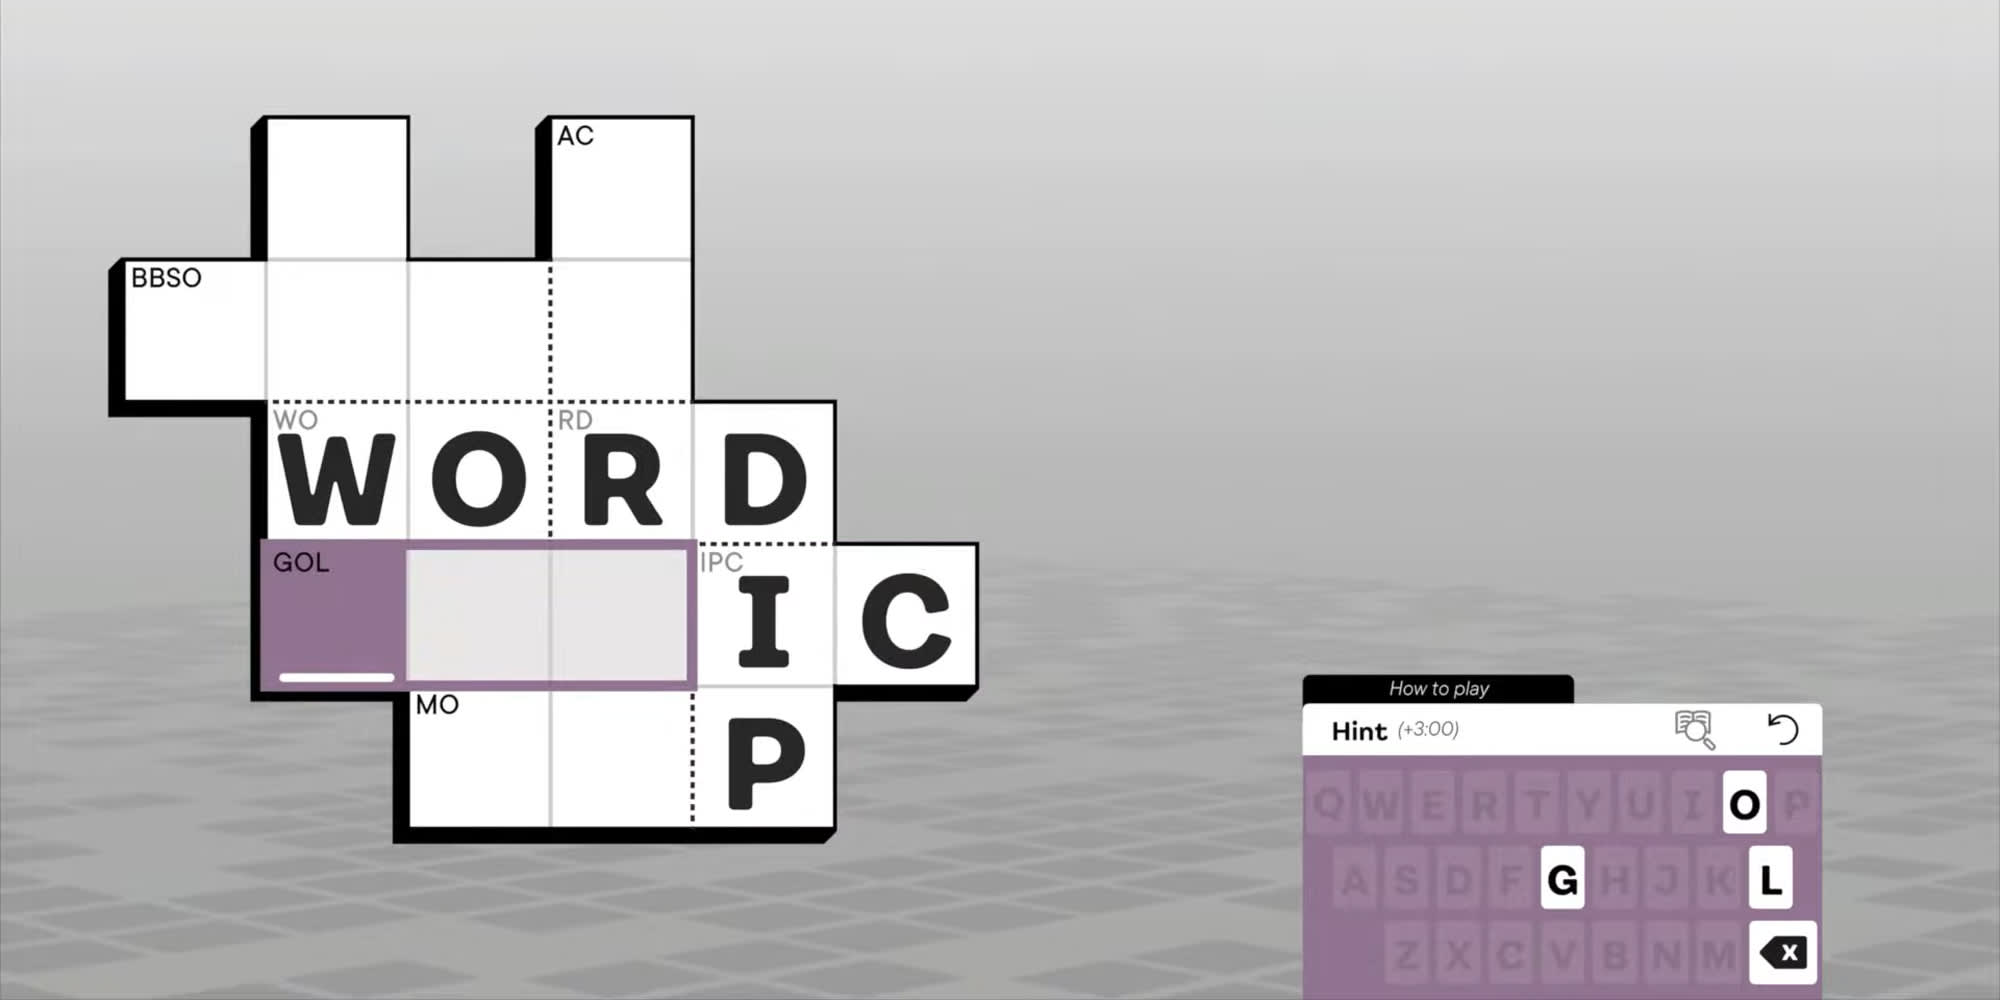 This New Game is Like Wordle Meets Sudoku By Way of Crosswords